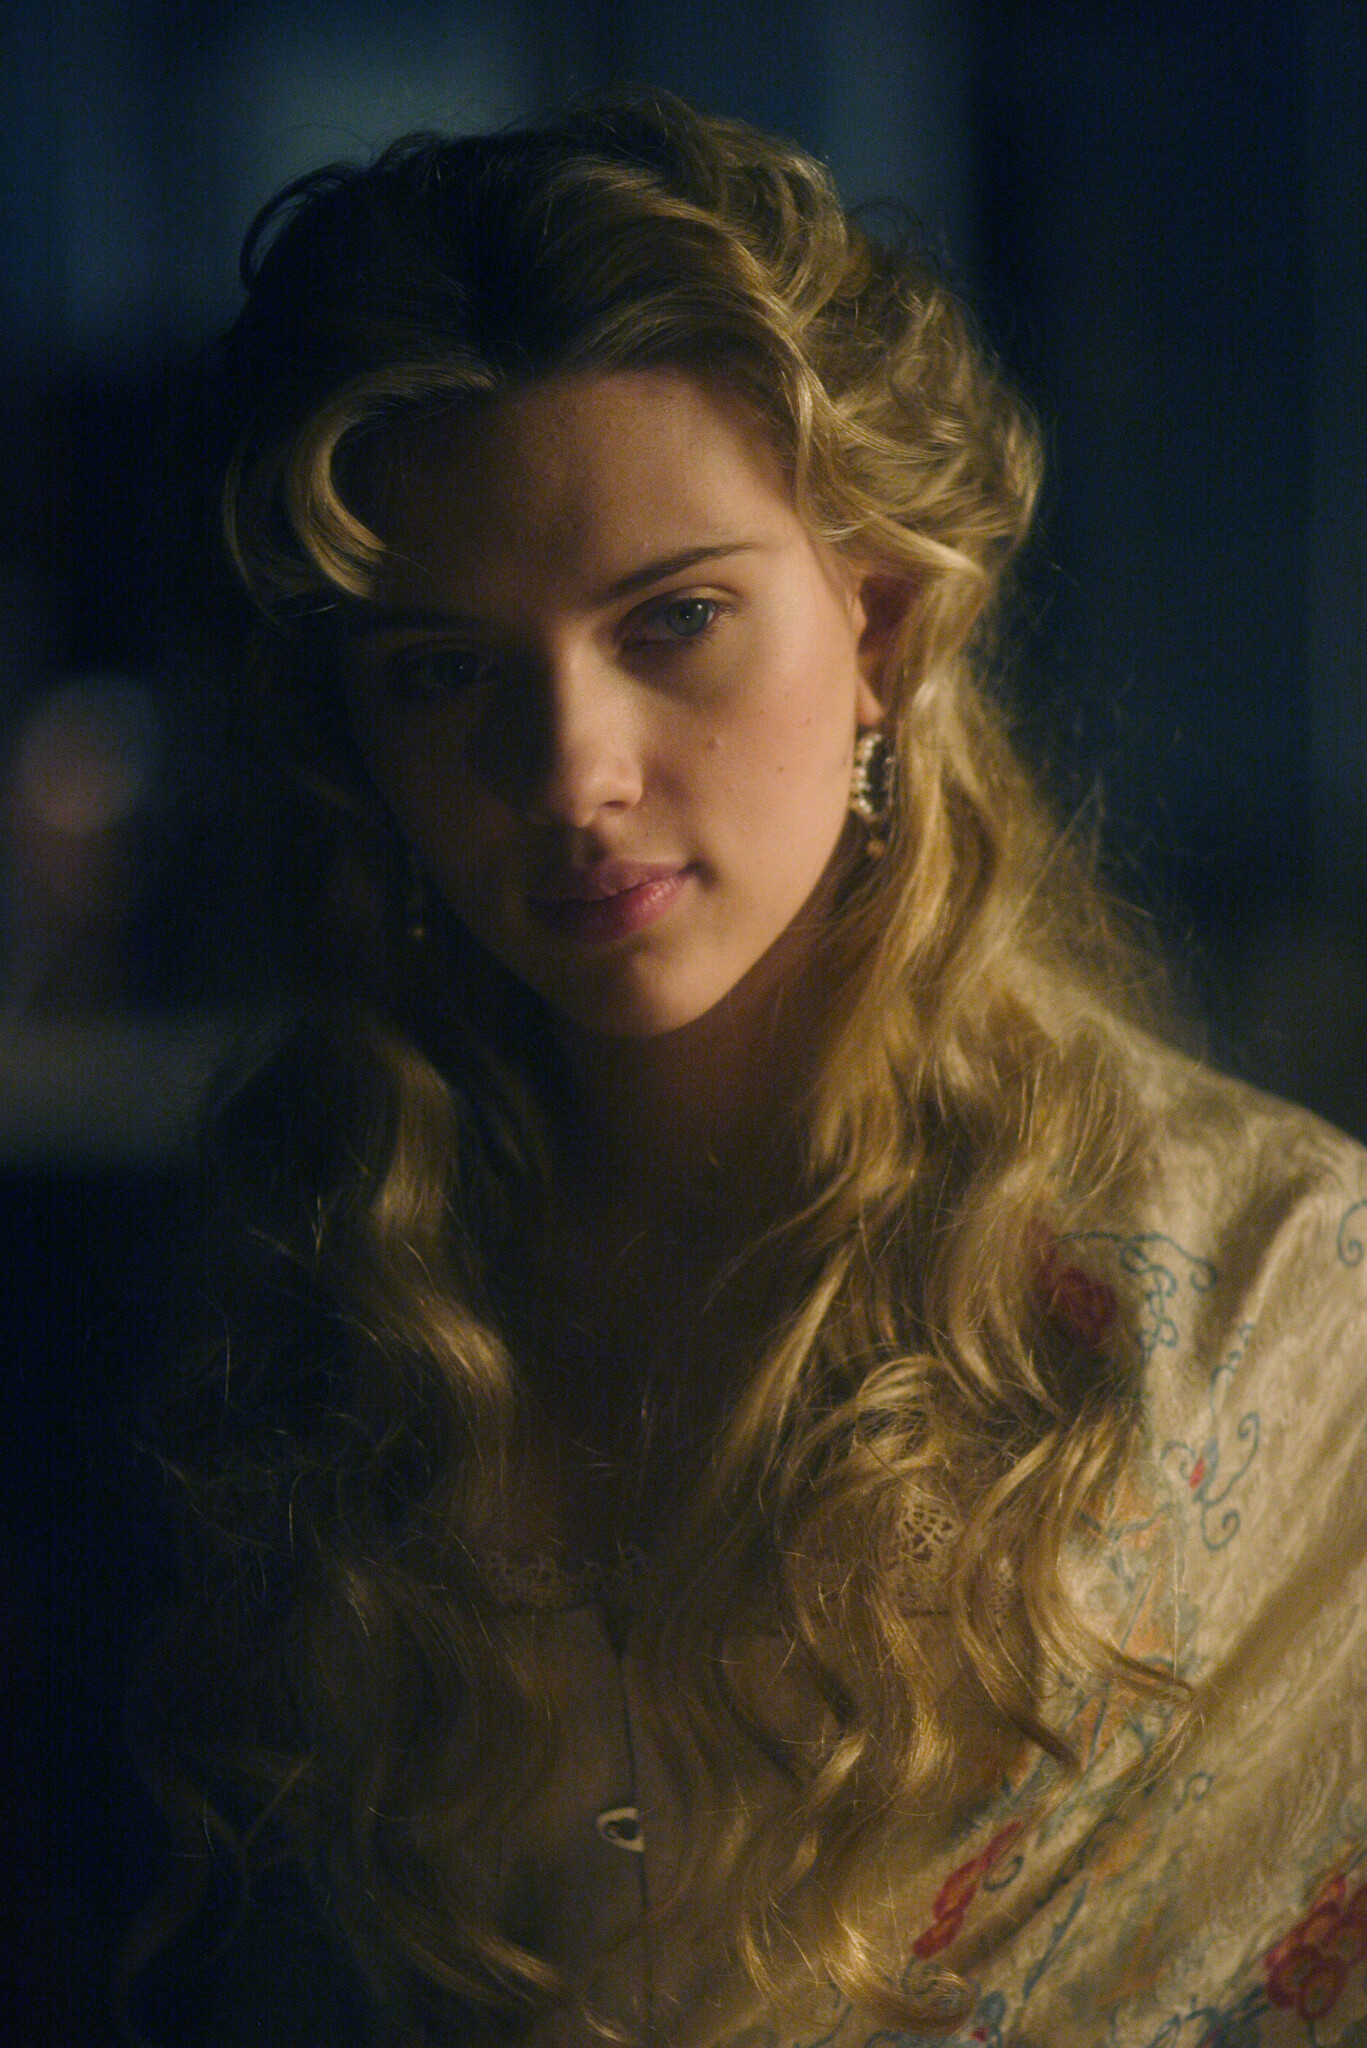 The Prestige: Scarlett Johansson as Olivia Wenscombe, Angier and Borden's assistant. 1370x2050 HD Wallpaper.